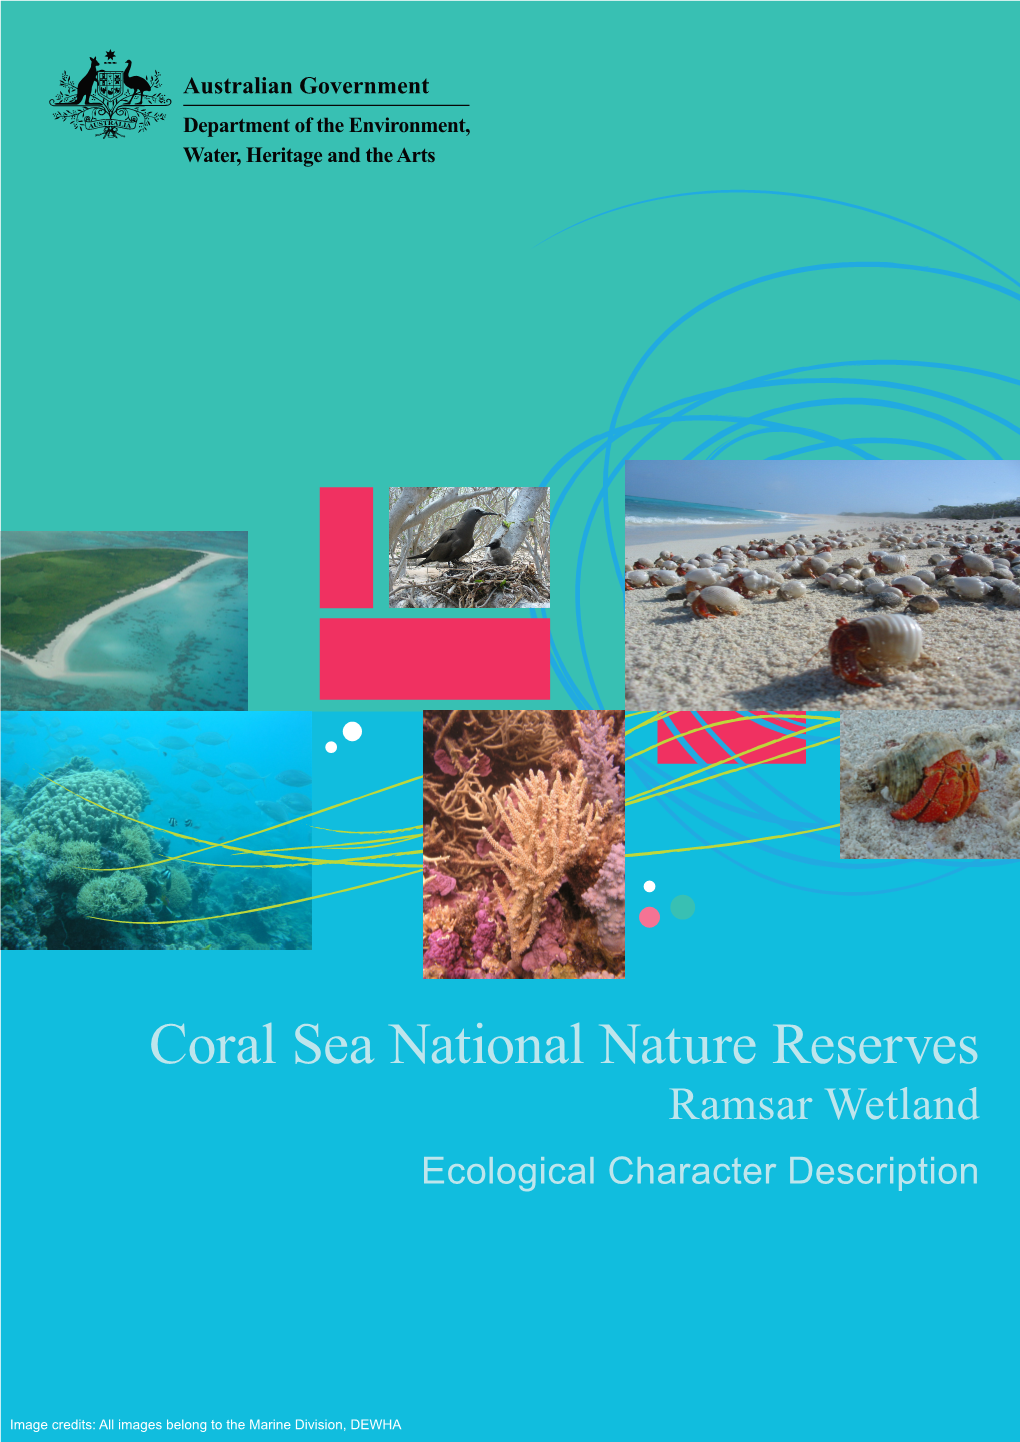 Coral Sea National Nature Reserves Ramsar Wetland Ecological Character Description